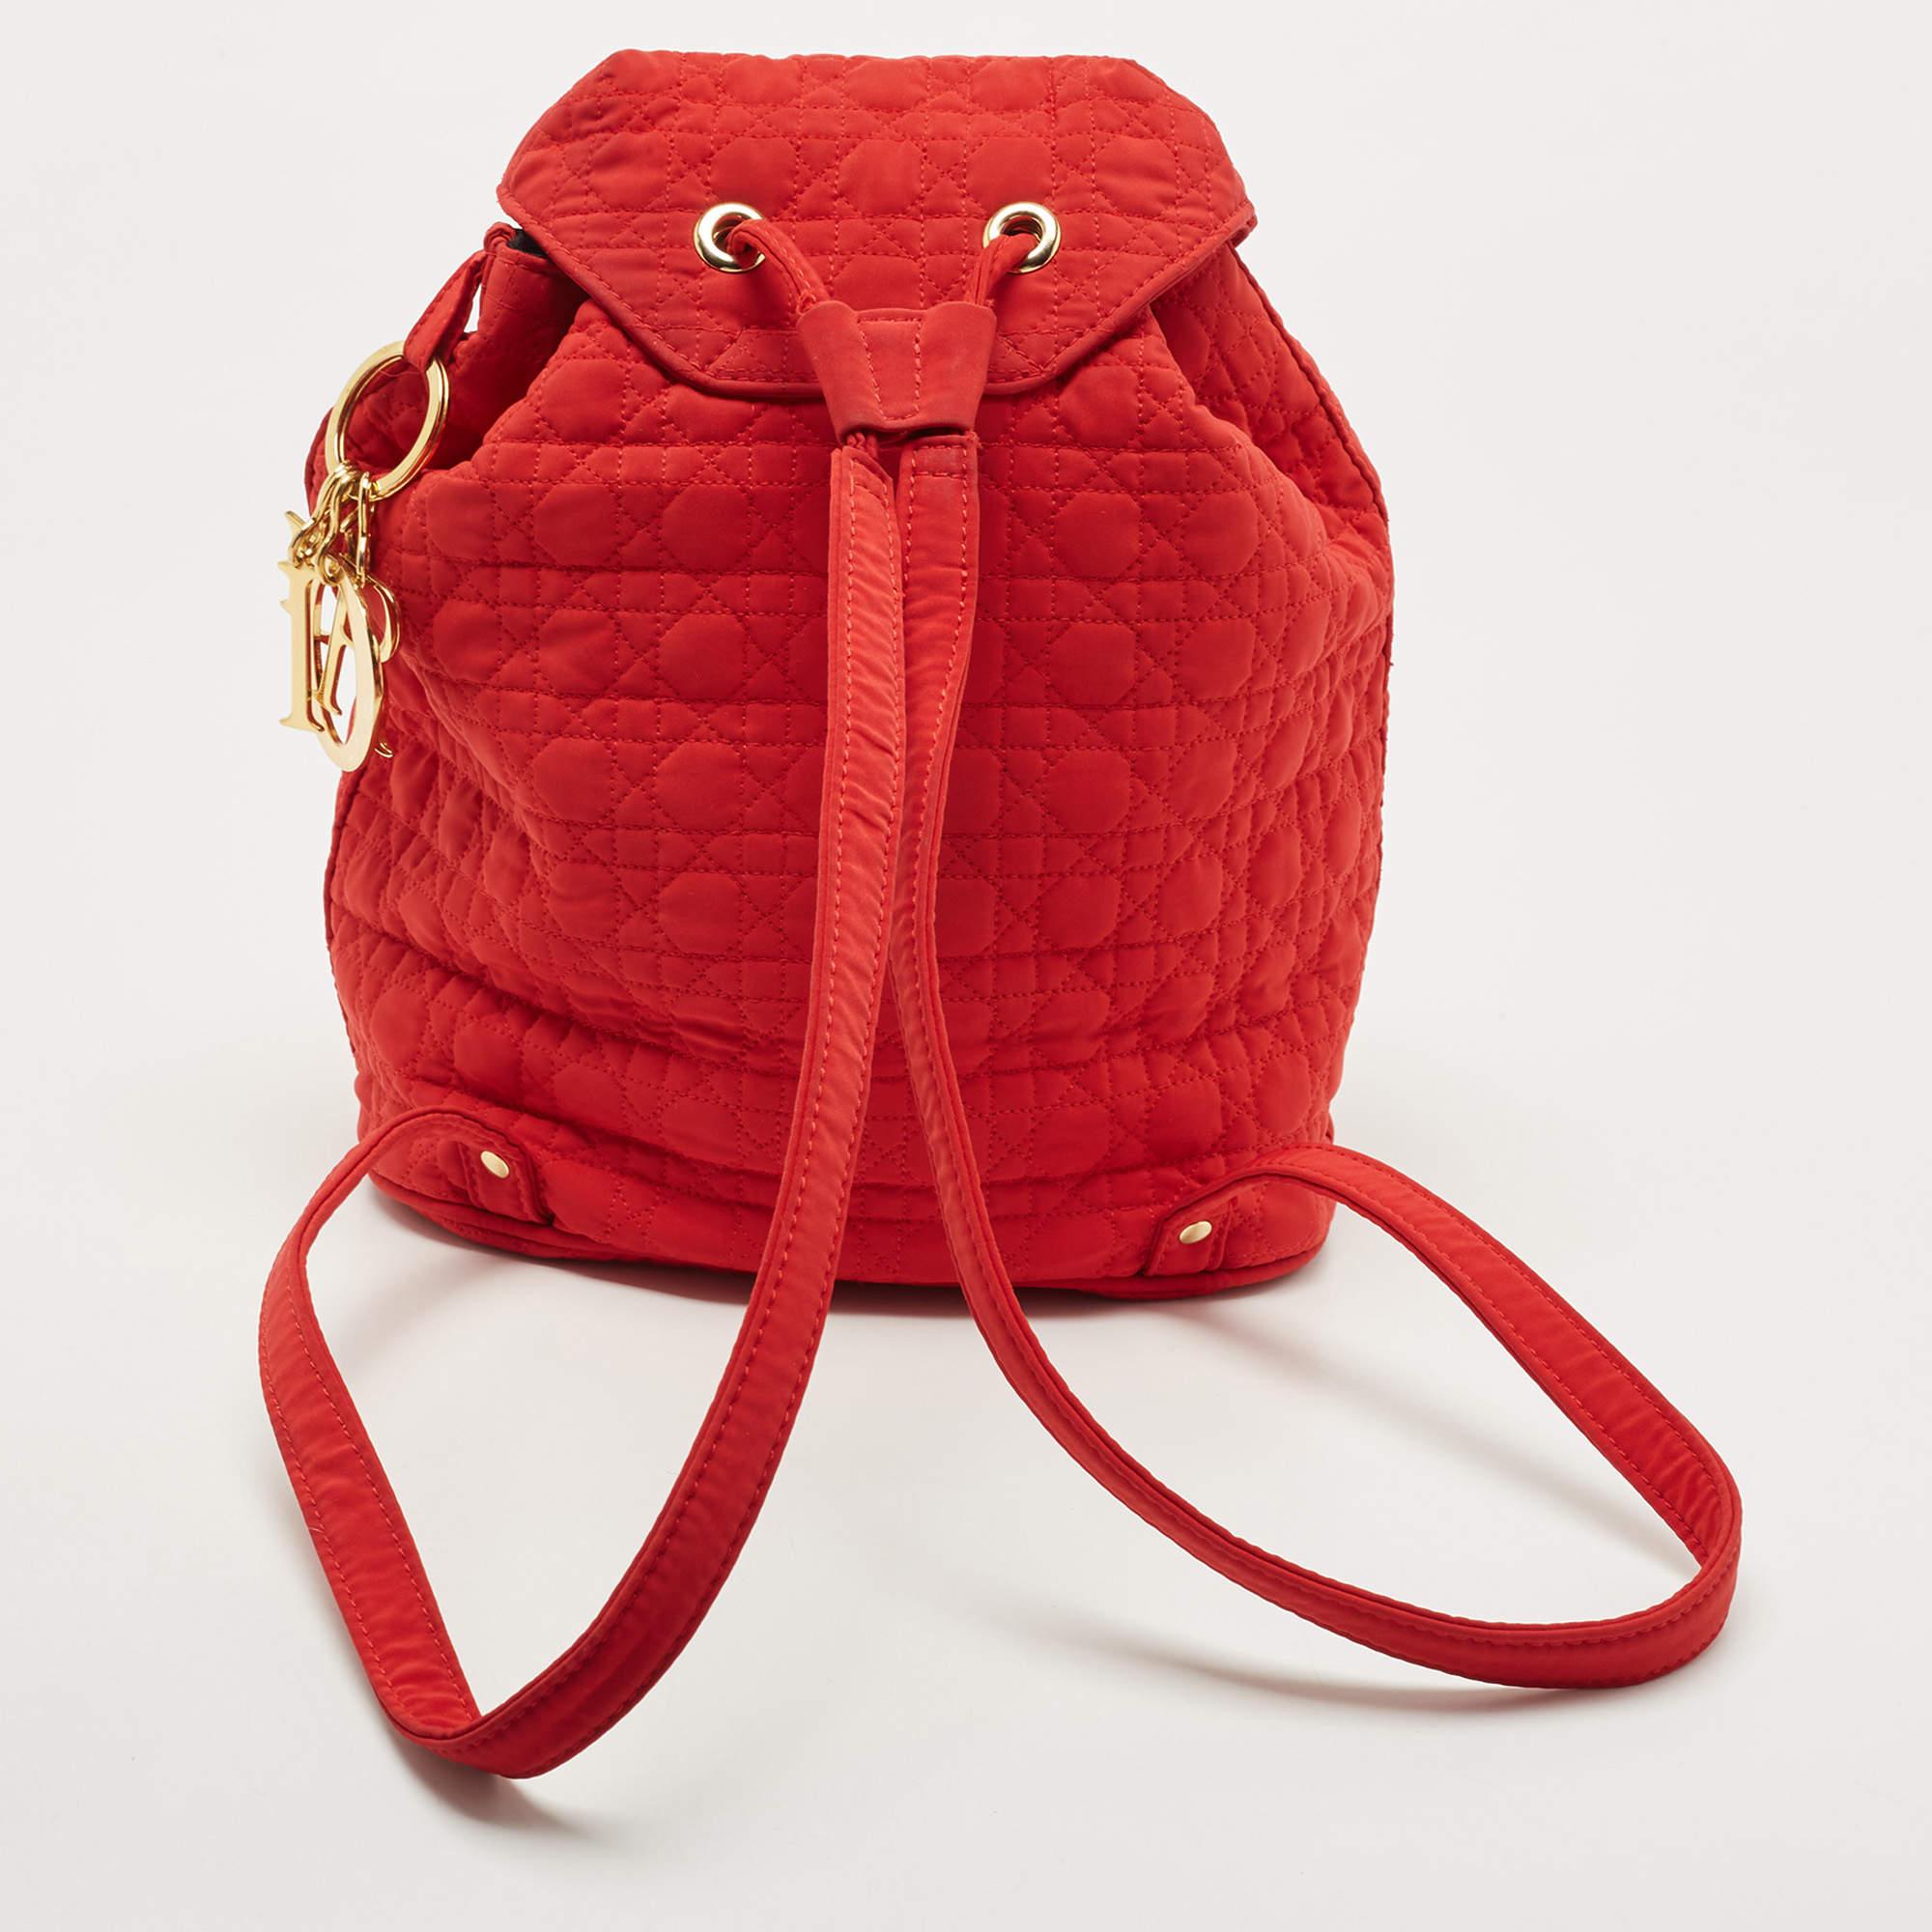 This Dior mini backpack is an example of the brand's fine designs that are skillfully crafted to project a classic charm. It is a functional creation with an elevating appeal.

